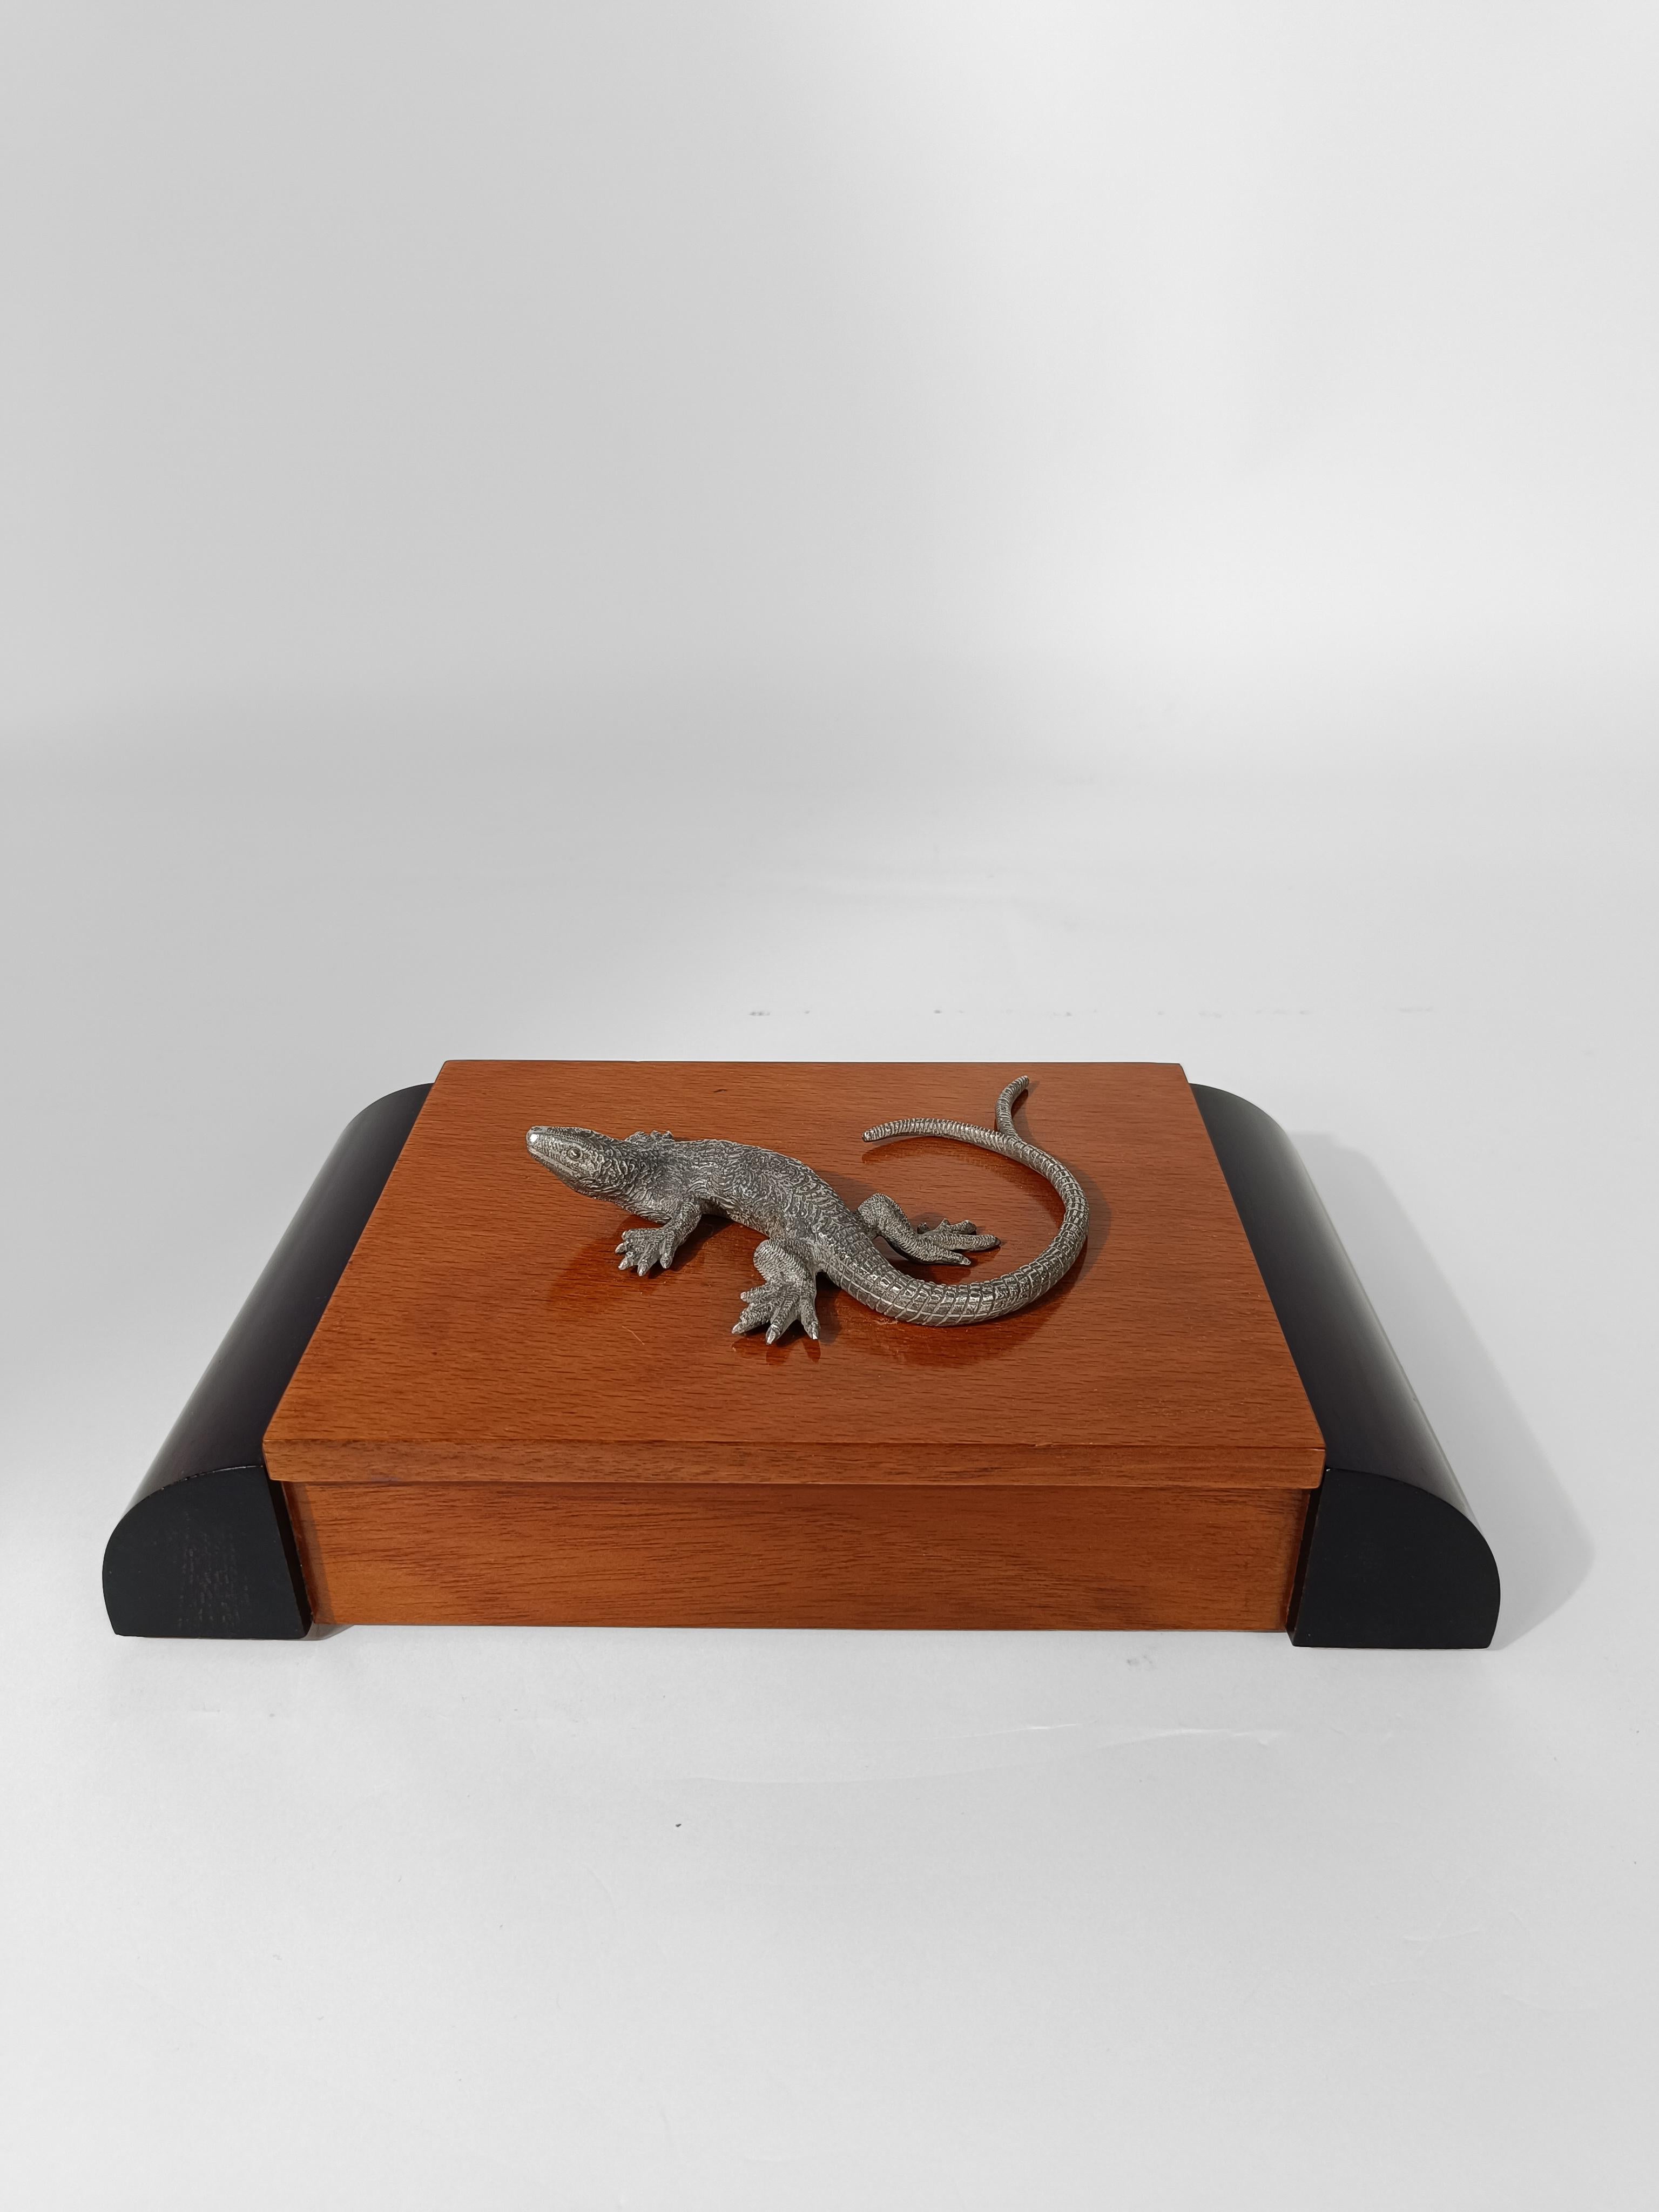 Art Deco wooden Box decorated with a Silver Tone Metal Lizard-shaped Handle For Sale 8